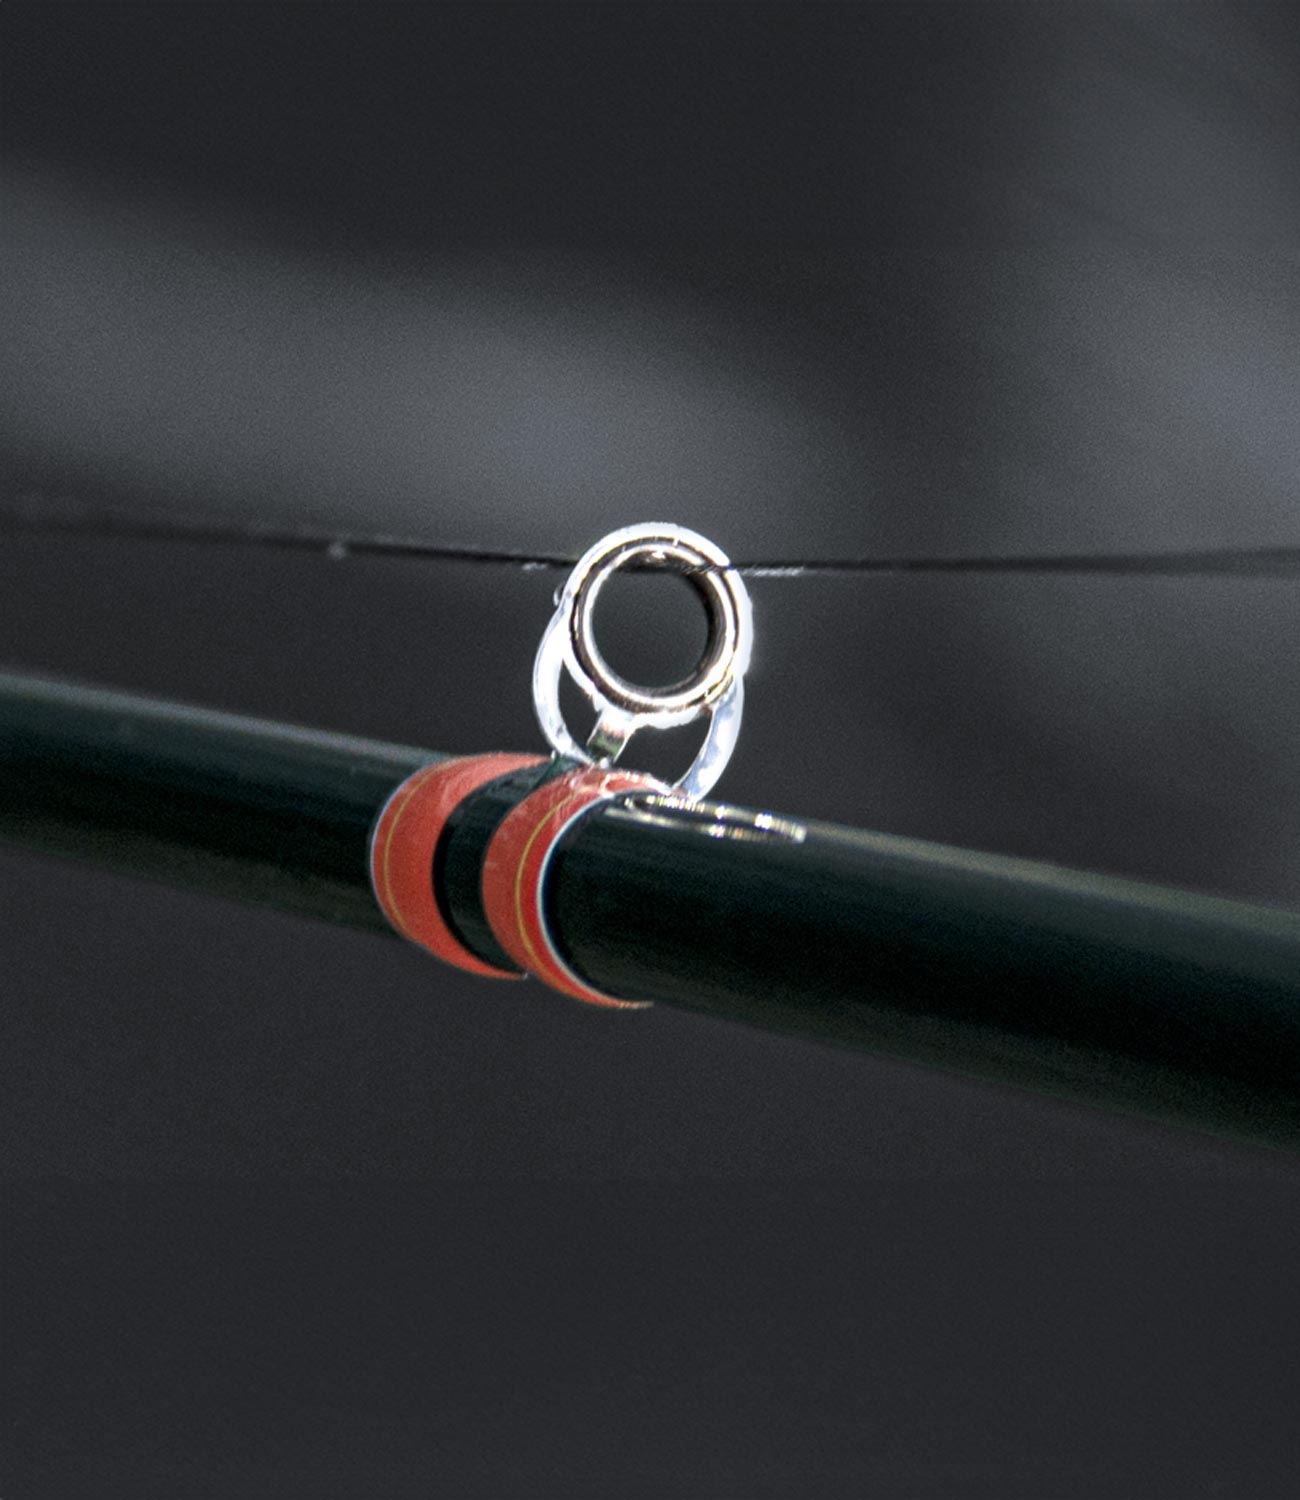 Buy Fishing Rod Guide Rings Stainless online